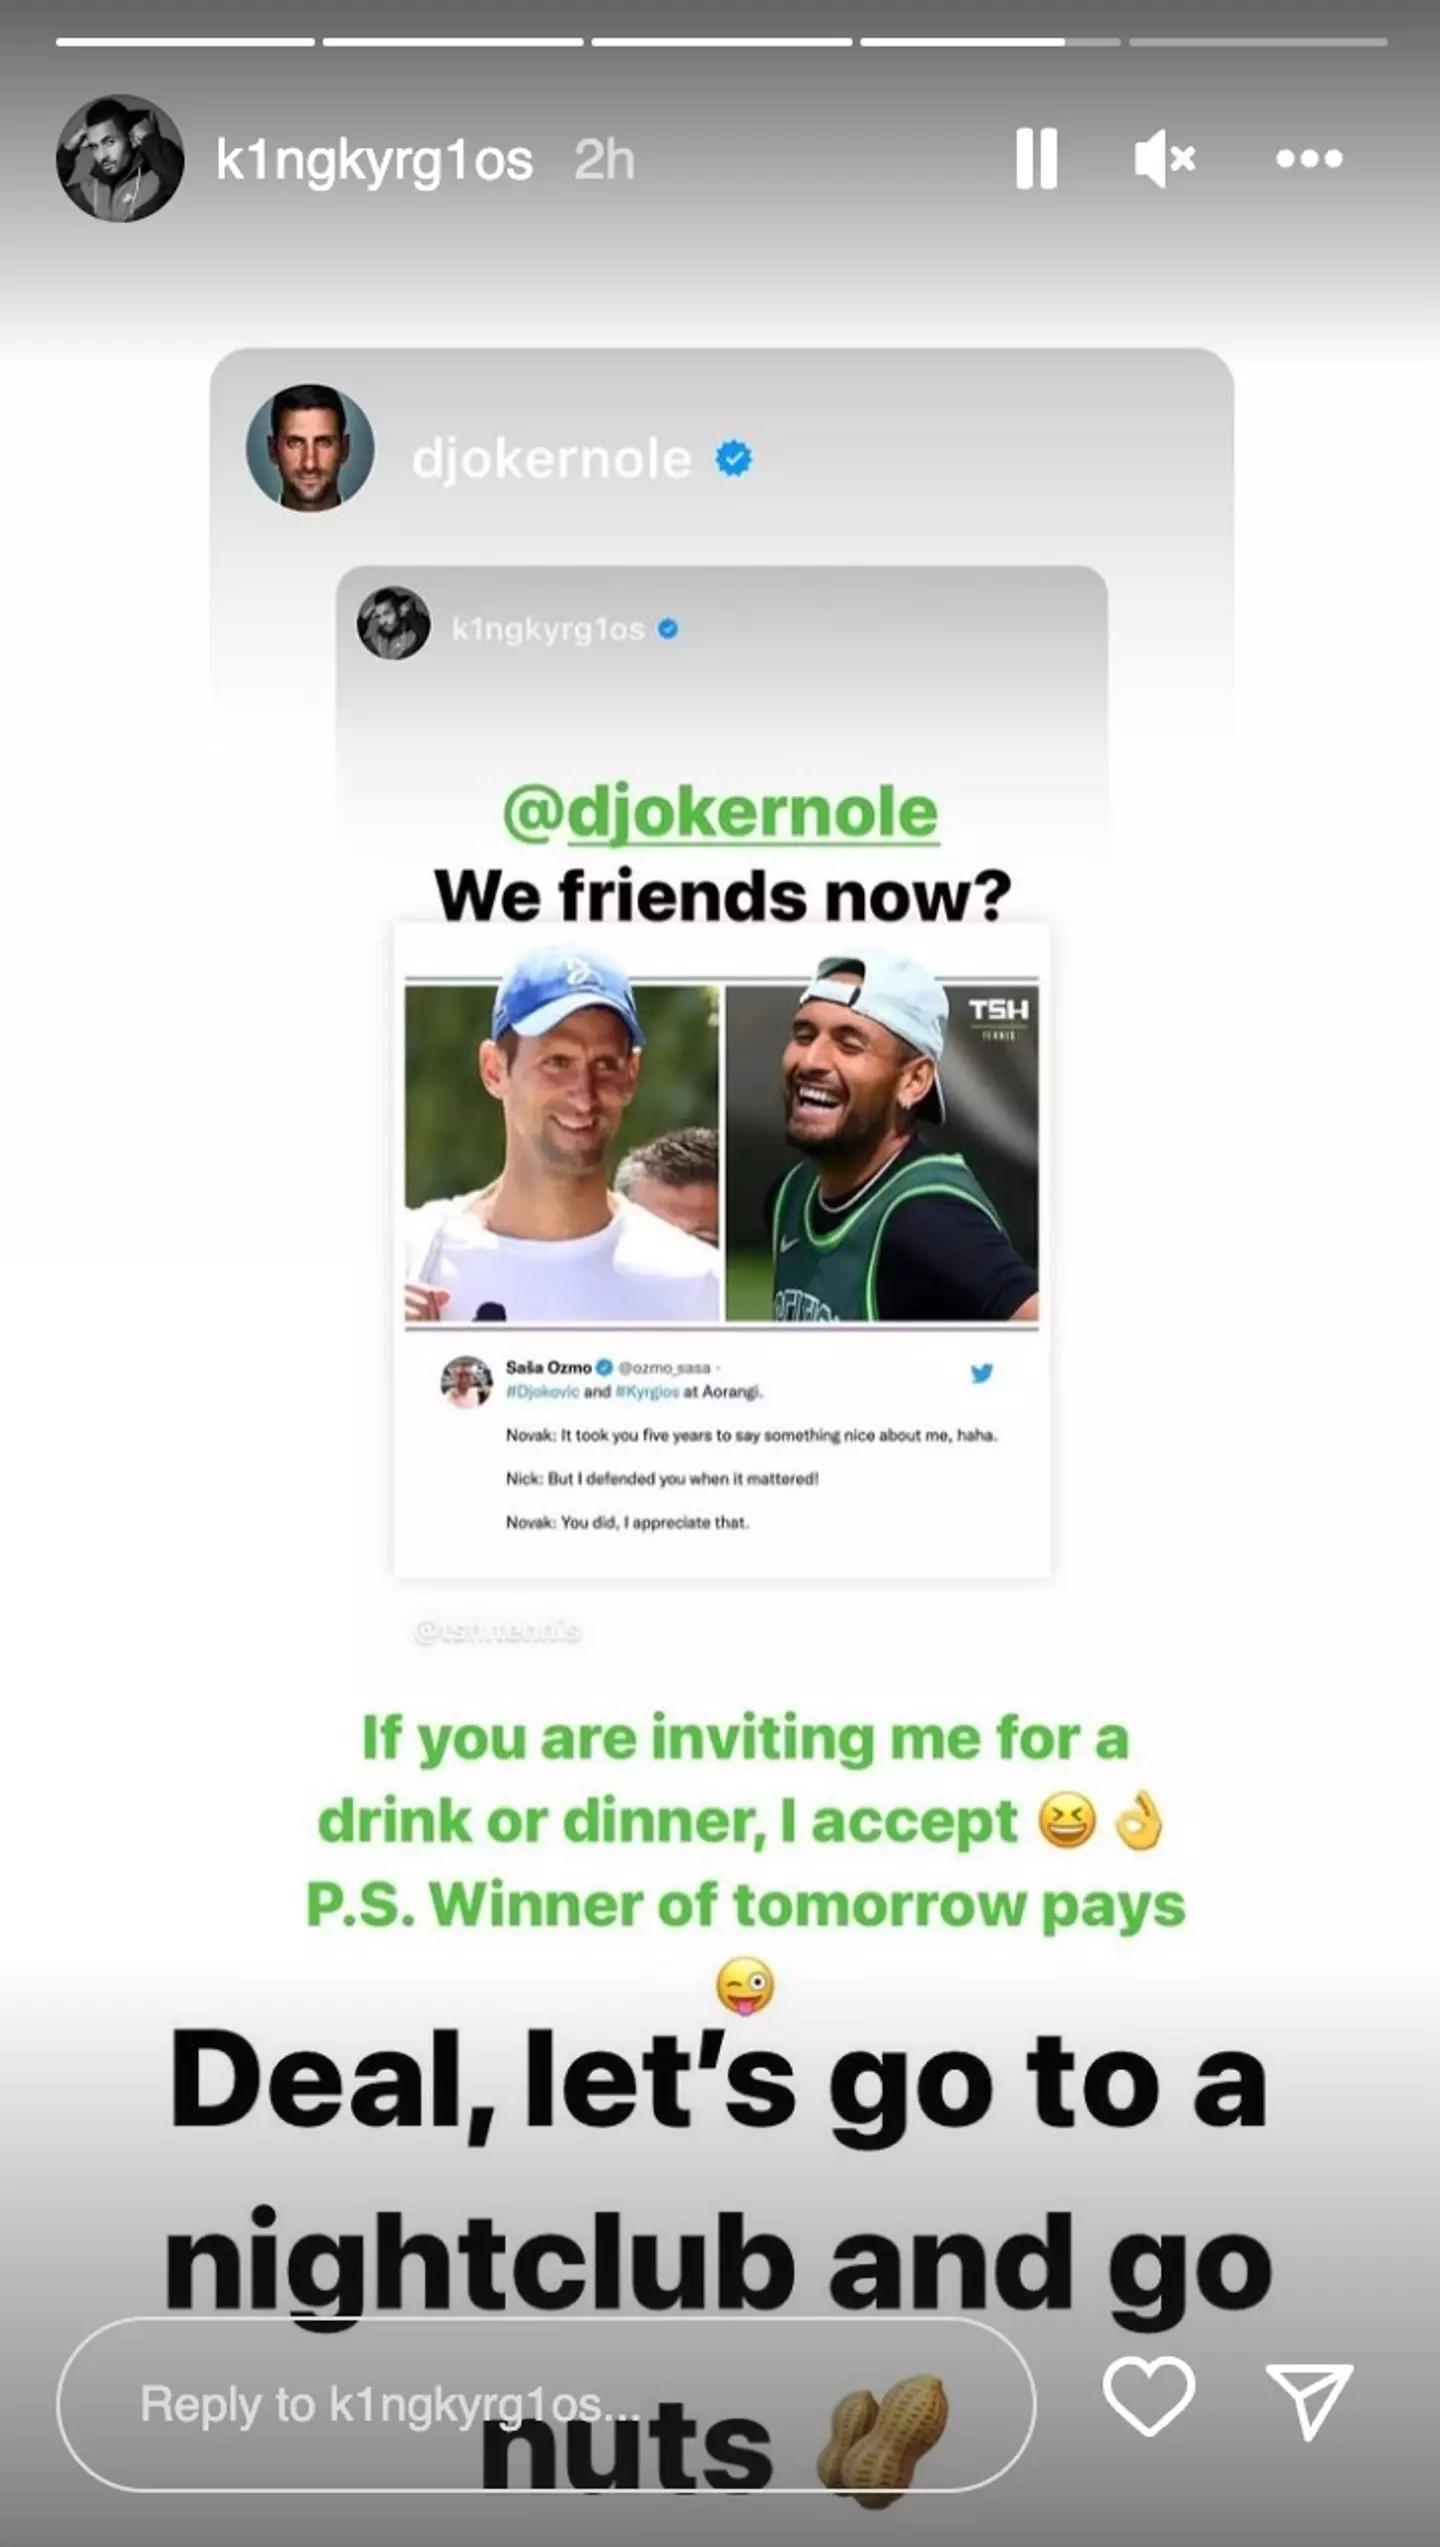 Kyrgios and Djokovic have agreed to a side bet on Sunday's Wimbledon final (Image: Instagram/Nick Kyrgios)